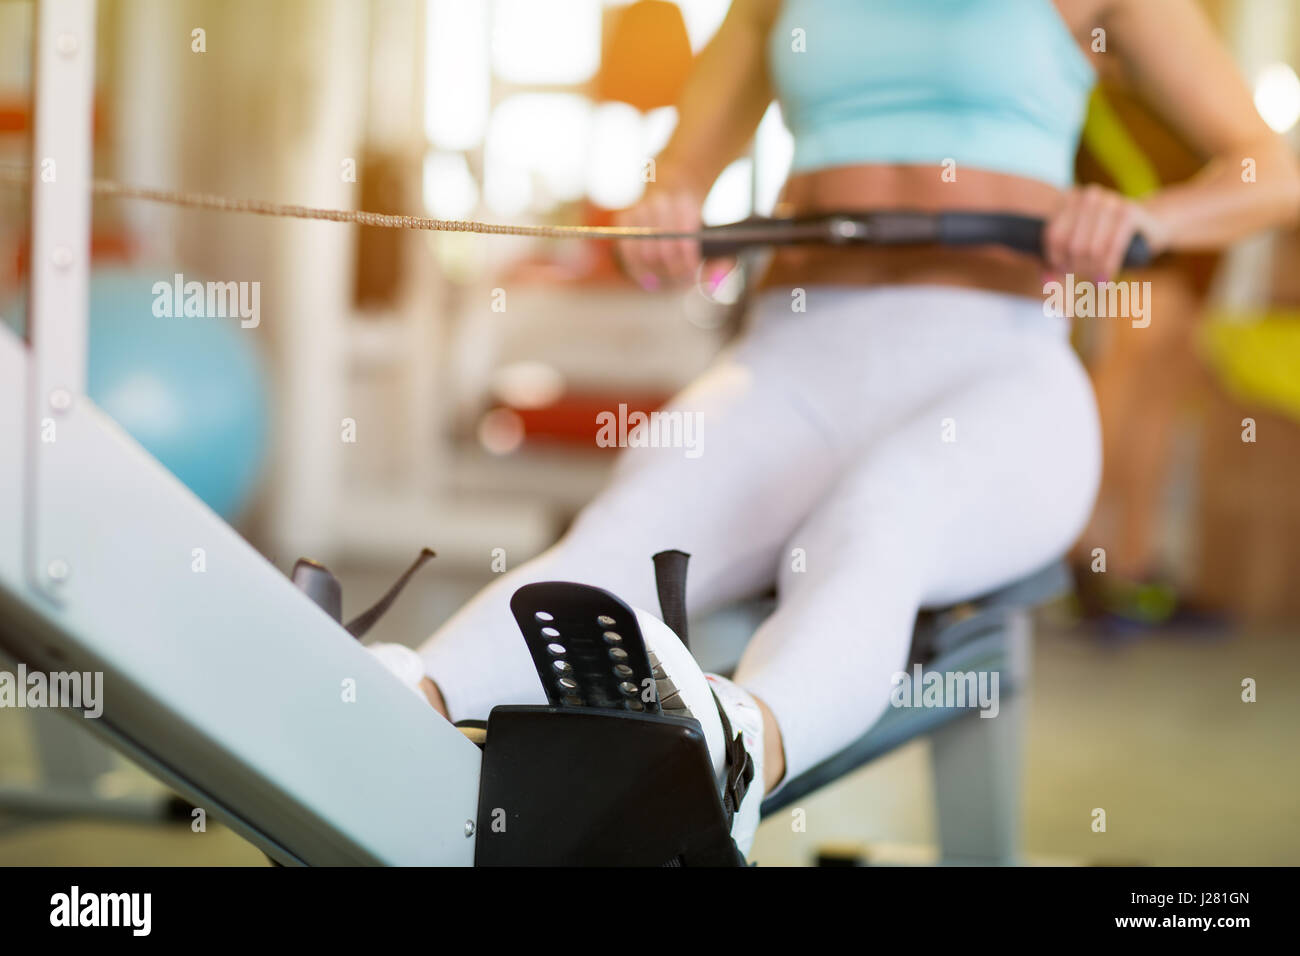 Fit girl doing exercise at the gym Stock Photo